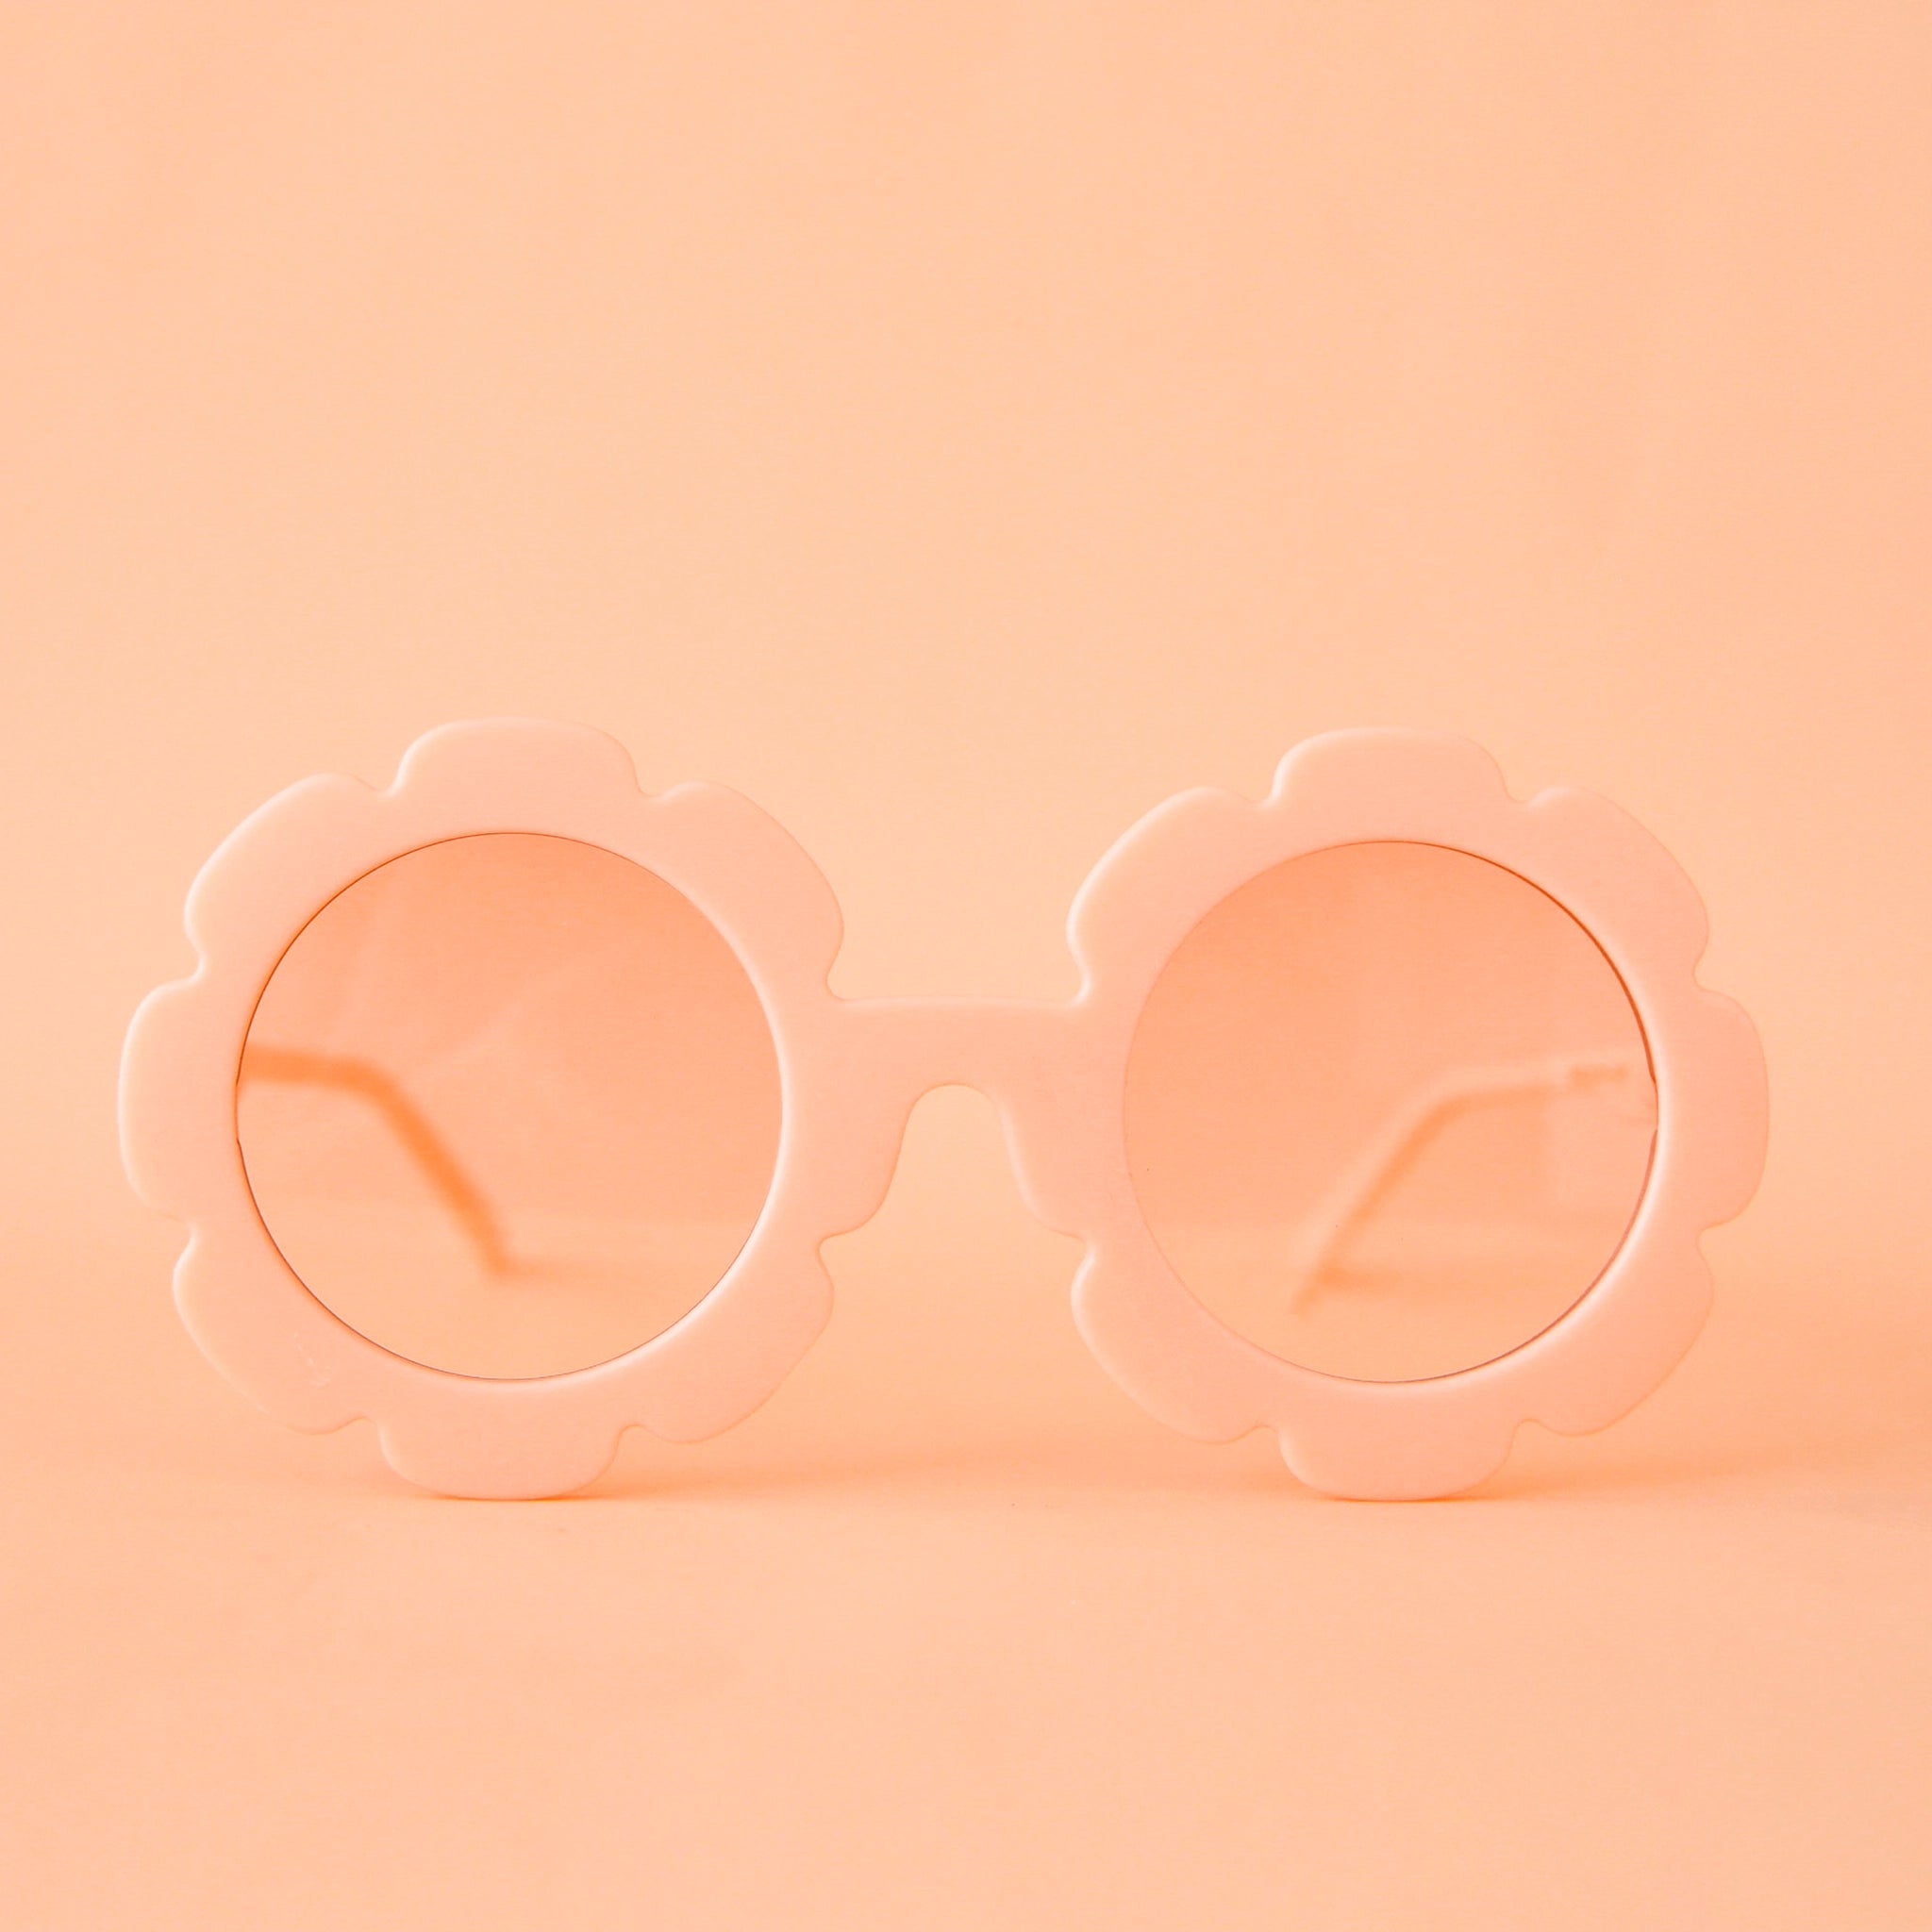 On a peachy background is a pair of flower shaped sunglasses with pink lenses and a apricot colored frame. 